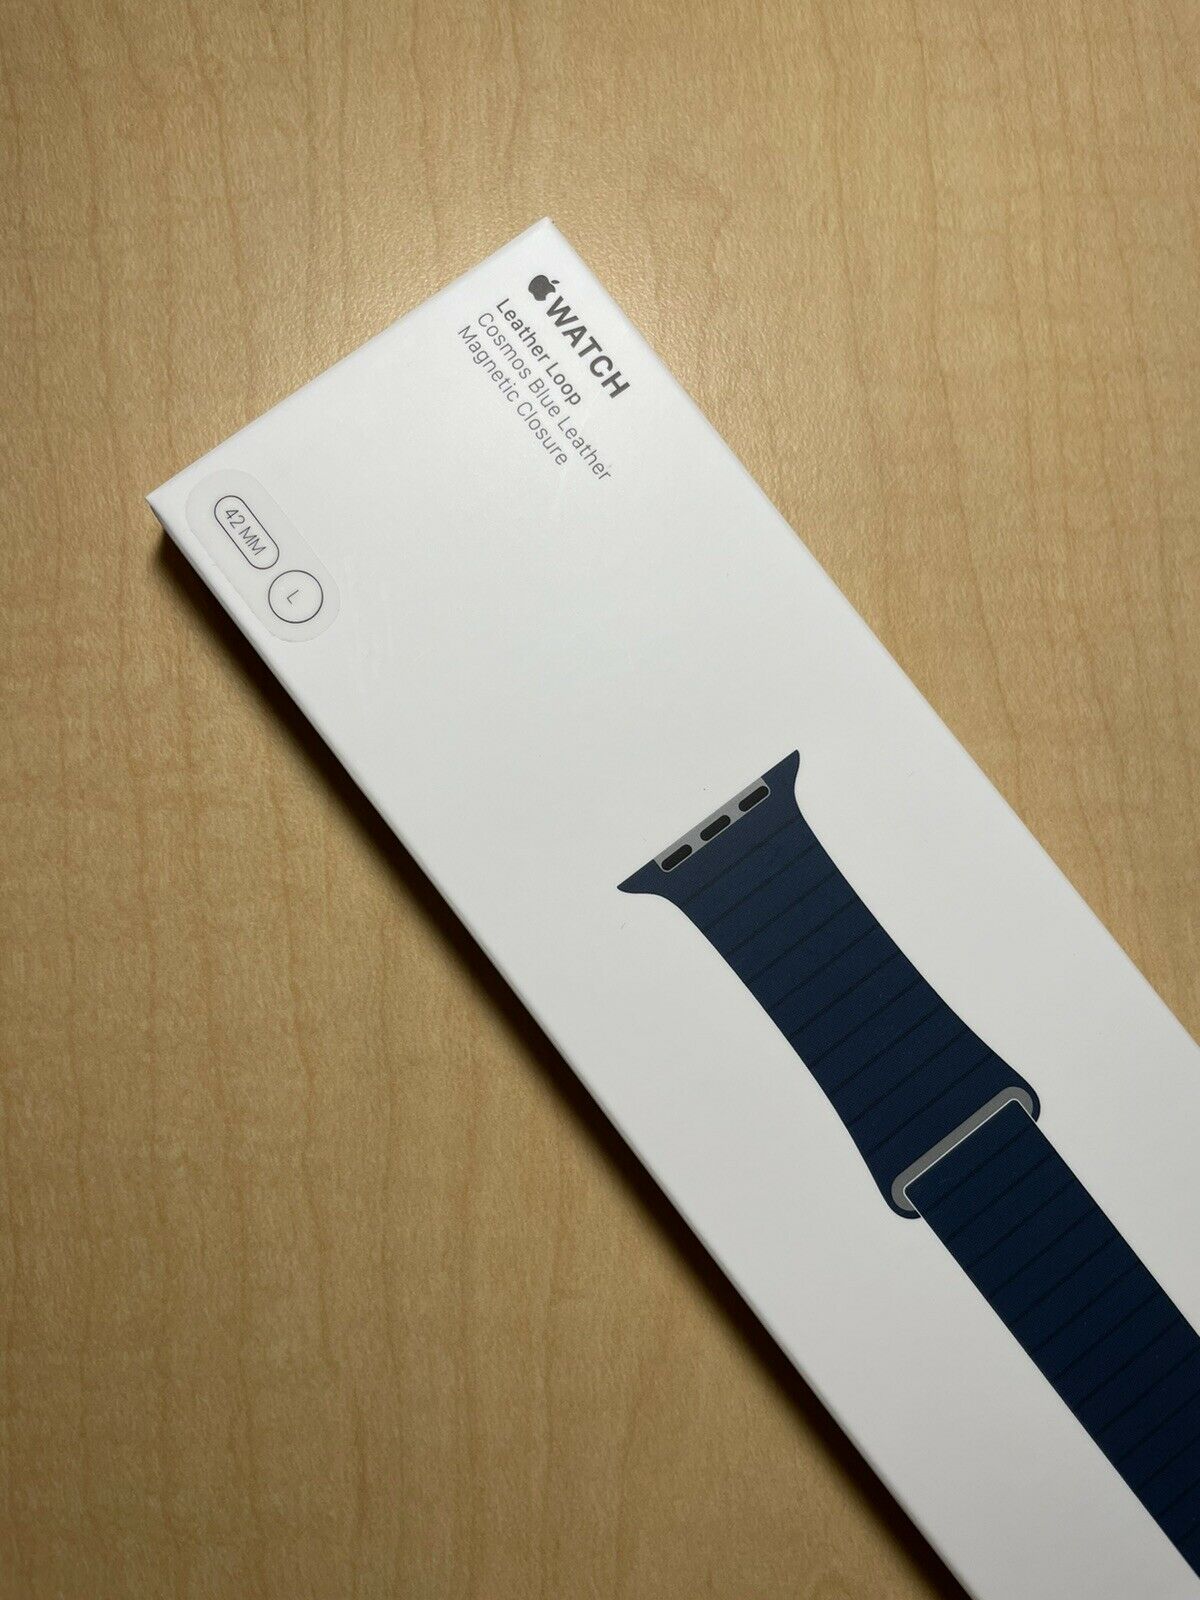 Apple Watch “cosmos Blue” Leather Loop 42-44mm Size Large! Original! Sealed